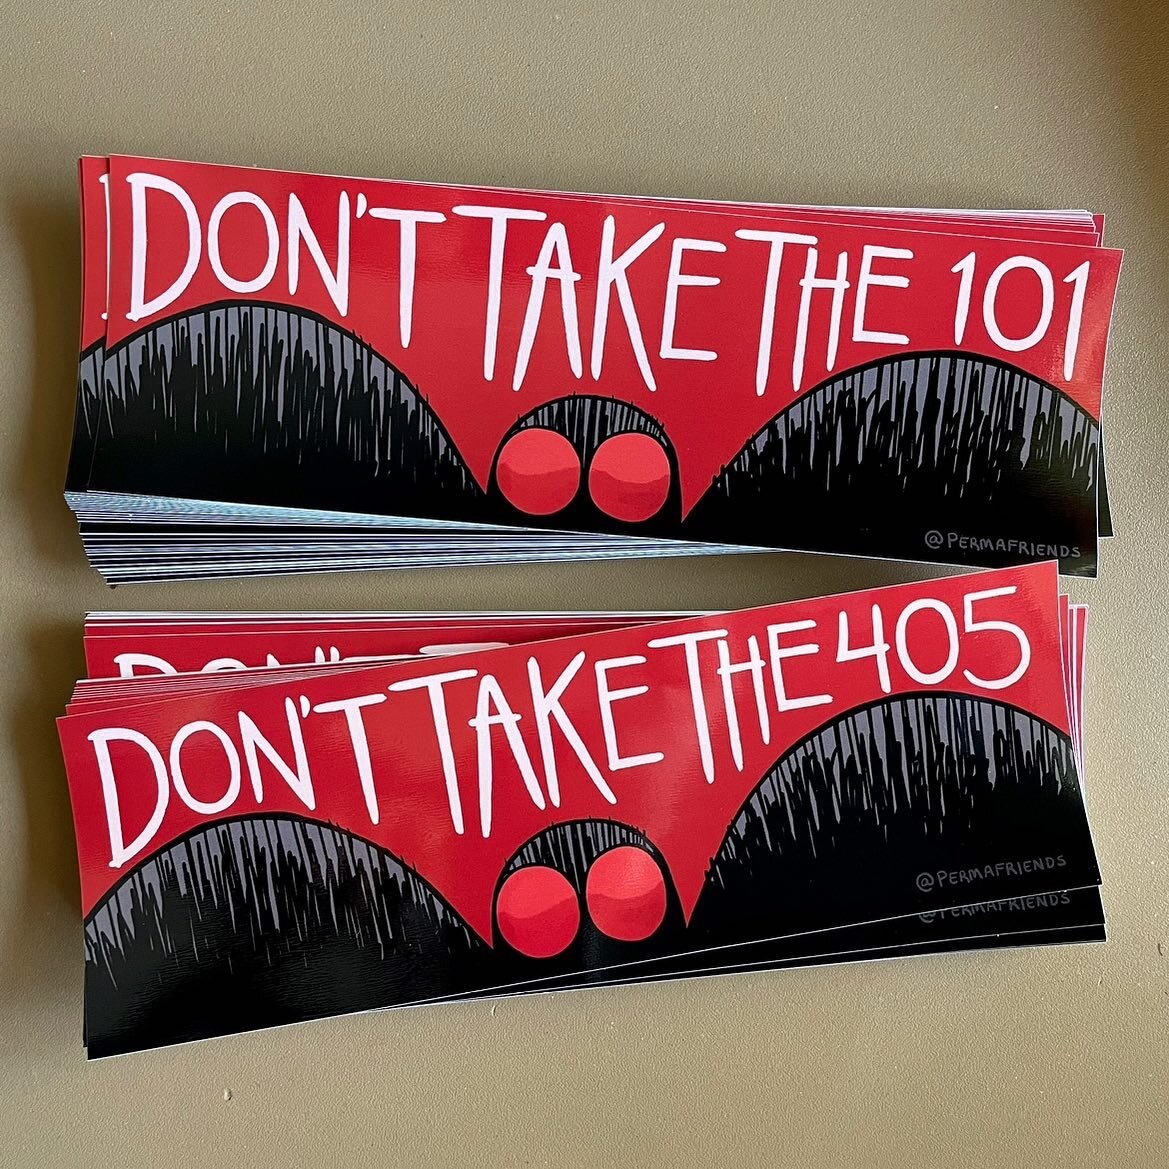 First batch of my @comic_con orders has arrived. Heed the Mothman&rsquo;s warnings and avoid the 405/101 freeways at all costs! Come buy these bumper stickers in Artists Alley-BB-02 in less than 2 weeks.

#comiccon #mothman #cryptid